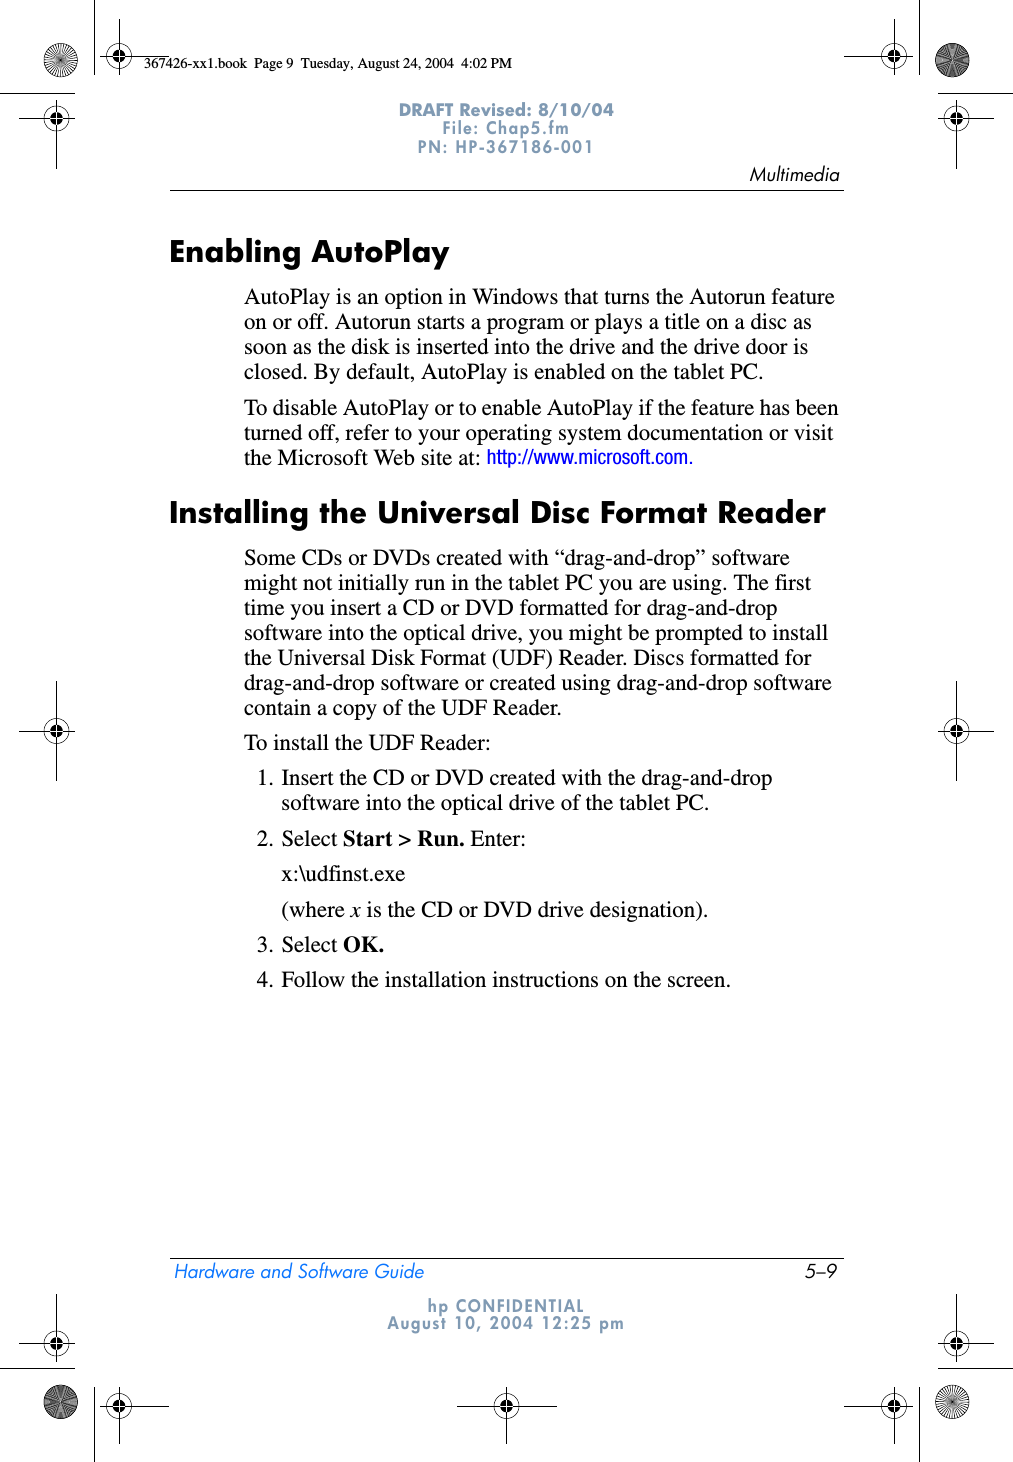 MultimediaHardware and Software Guide 5–9DRAFT Revised: 8/10/04File: Chap5.fm PN: HP-367186-001 hp CONFIDENTIALAugust 10, 2004 12:25 pmEnabling AutoPlayAutoPlay is an option in Windows that turns the Autorun feature on or off. Autorun starts a program or plays a title on a disc as soon as the disk is inserted into the drive and the drive door is closed. By default, AutoPlay is enabled on the tablet PC.To disable AutoPlay or to enable AutoPlay if the feature has been turned off, refer to your operating system documentation or visit the Microsoft Web site at: http://www.microsoft.com.Installing the Universal Disc Format ReaderSome CDs or DVDs created with “drag-and-drop” software might not initially run in the tablet PC you are using. The first time you insert a CD or DVD formatted for drag-and-drop software into the optical drive, you might be prompted to install the Universal Disk Format (UDF) Reader. Discs formatted for drag-and-drop software or created using drag-and-drop software contain a copy of the UDF Reader.To install the UDF Reader:1. Insert the CD or DVD created with the drag-and-drop software into the optical drive of the tablet PC.2. Select Start &gt; Run. Enter:x:\udfinst.exe(where x is the CD or DVD drive designation).3. Select OK.4. Follow the installation instructions on the screen.367426-xx1.book  Page 9  Tuesday, August 24, 2004  4:02 PM